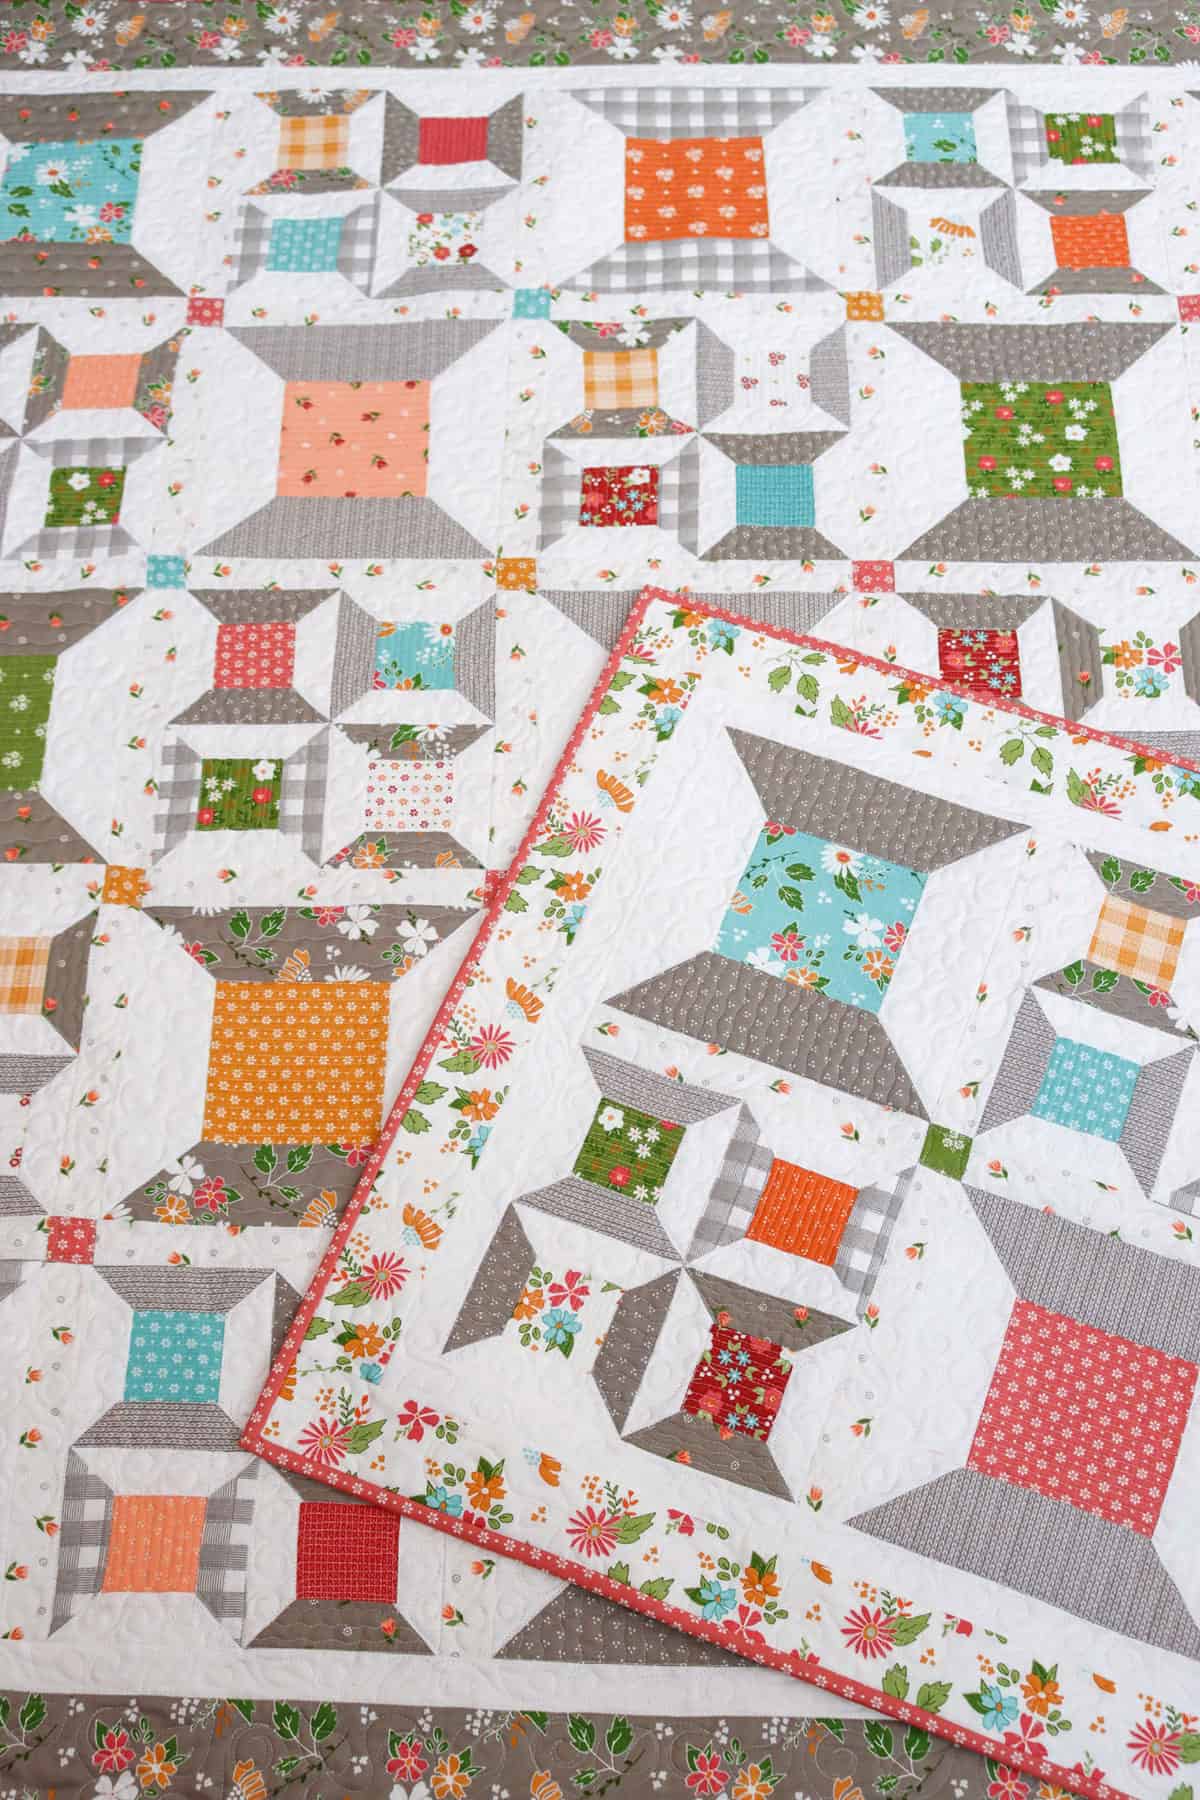 Best Quilt Ideas - Precut Friendly featured by Top US Quilt Blog, A Quilting Life